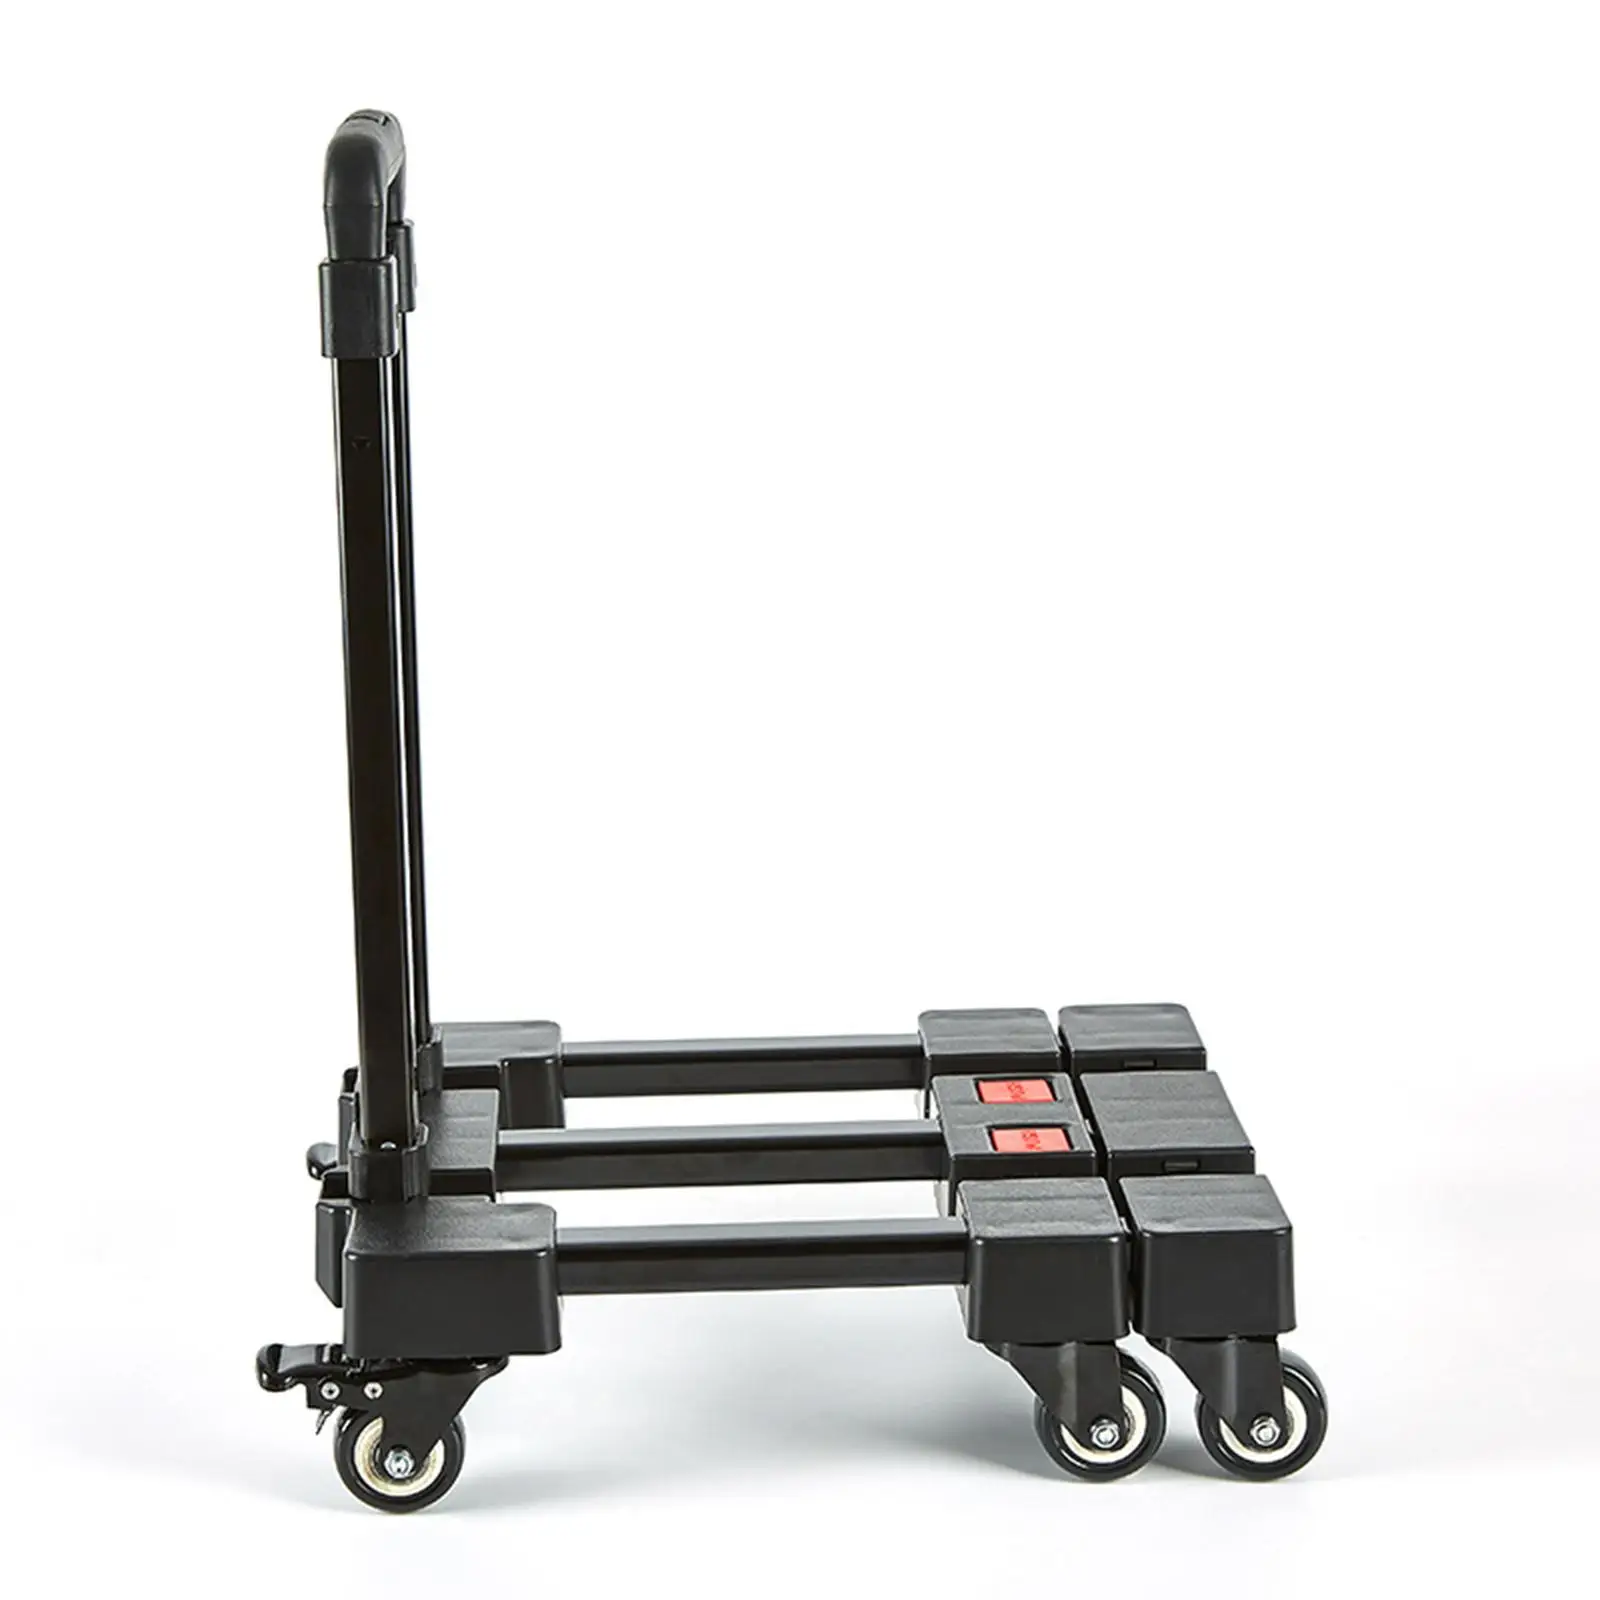 Folding Hand Truck with Adjustable Handle Moving Luggages Cart for Moving Shopping Office 100kg (220lb) Load Capacity